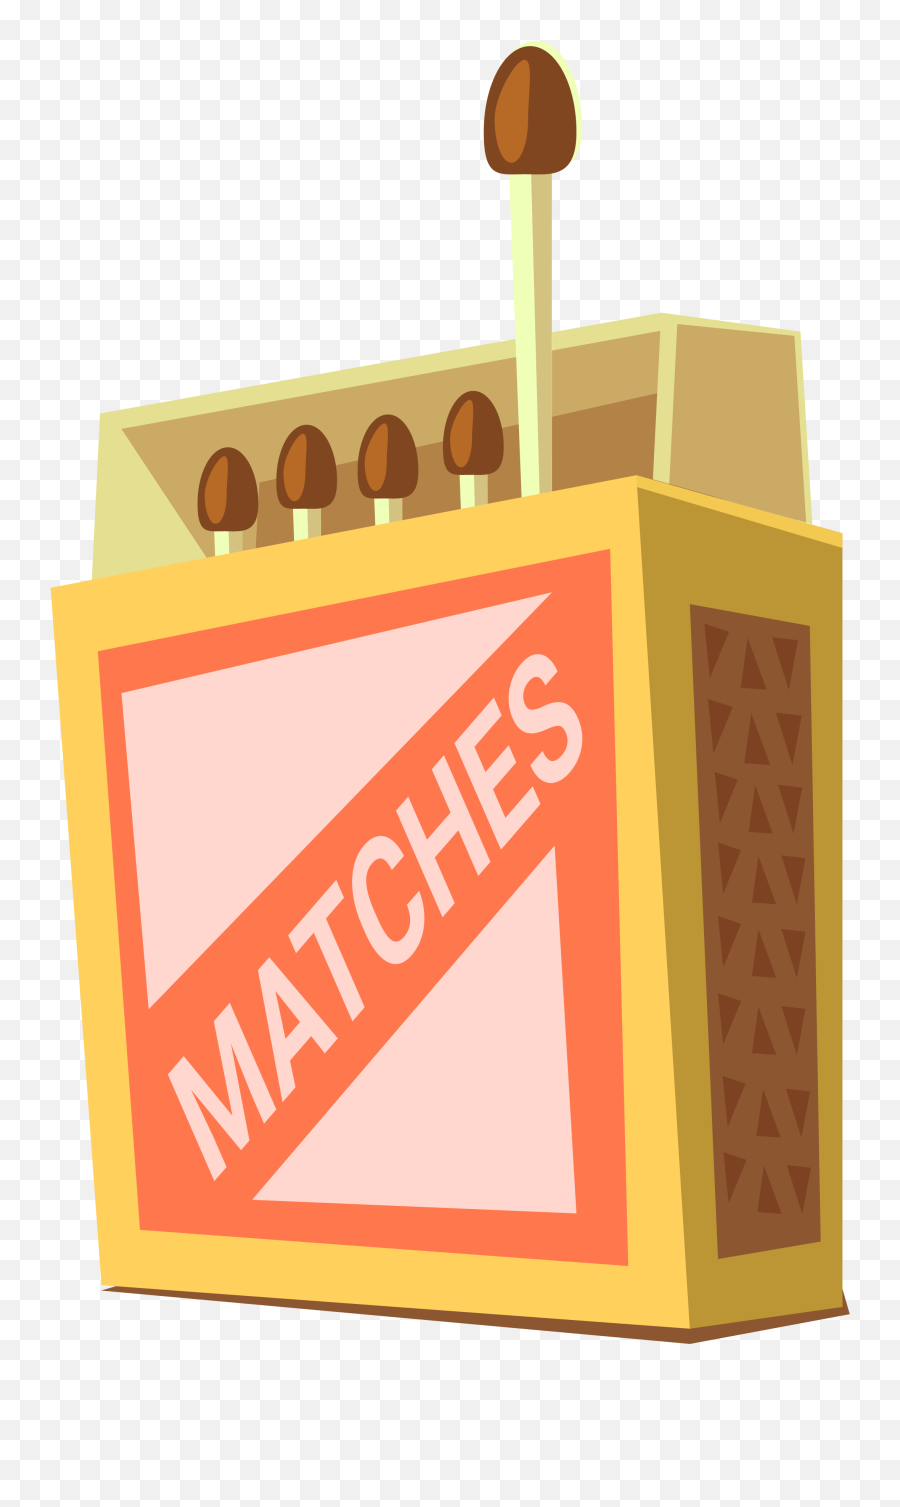 Matches Png Picture - Png Matches Cartoon,Matches Png